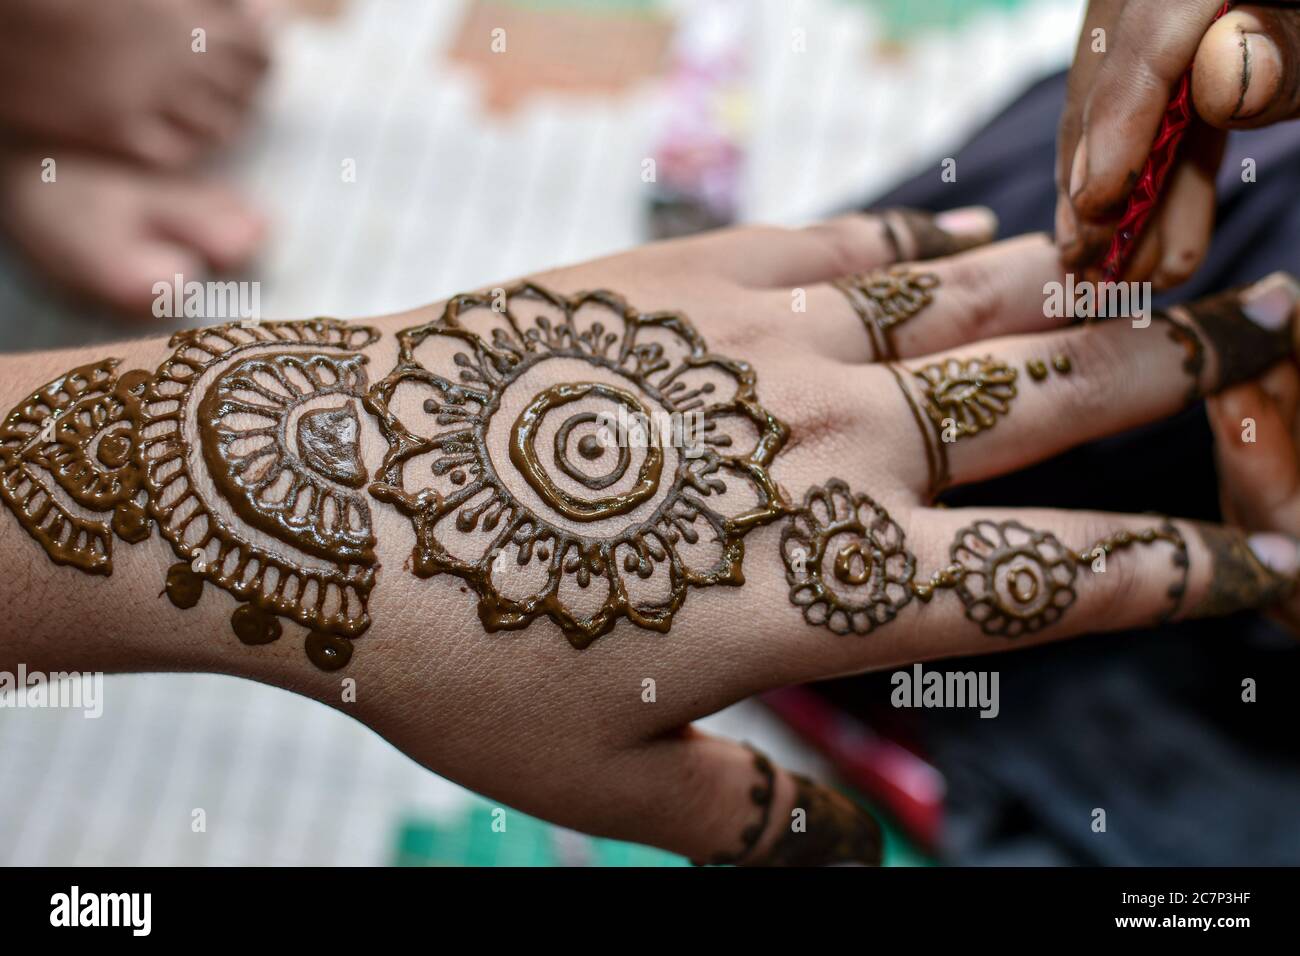 Simple Mehndi Designs Videos Tutorial 2019:Amazon.ca:Appstore for Android